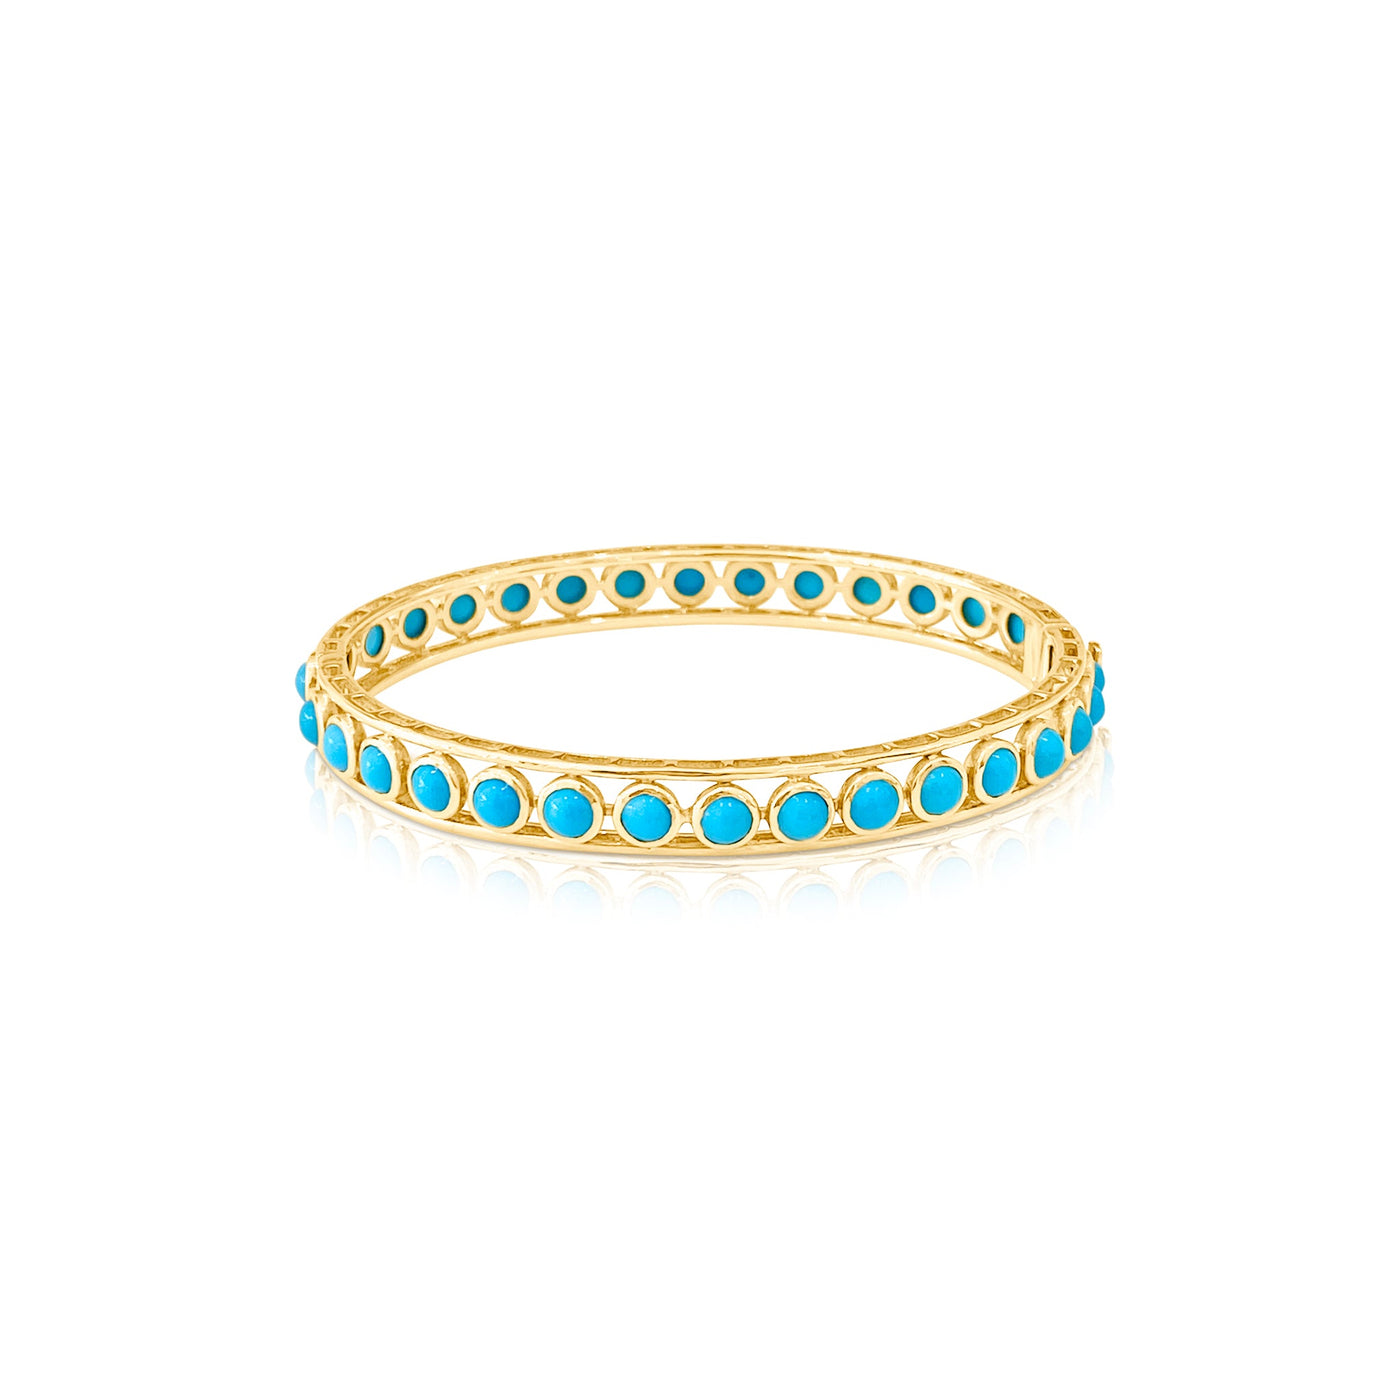 Turquoise Rd Bangle. Bracelet In 18K Yellow Gold